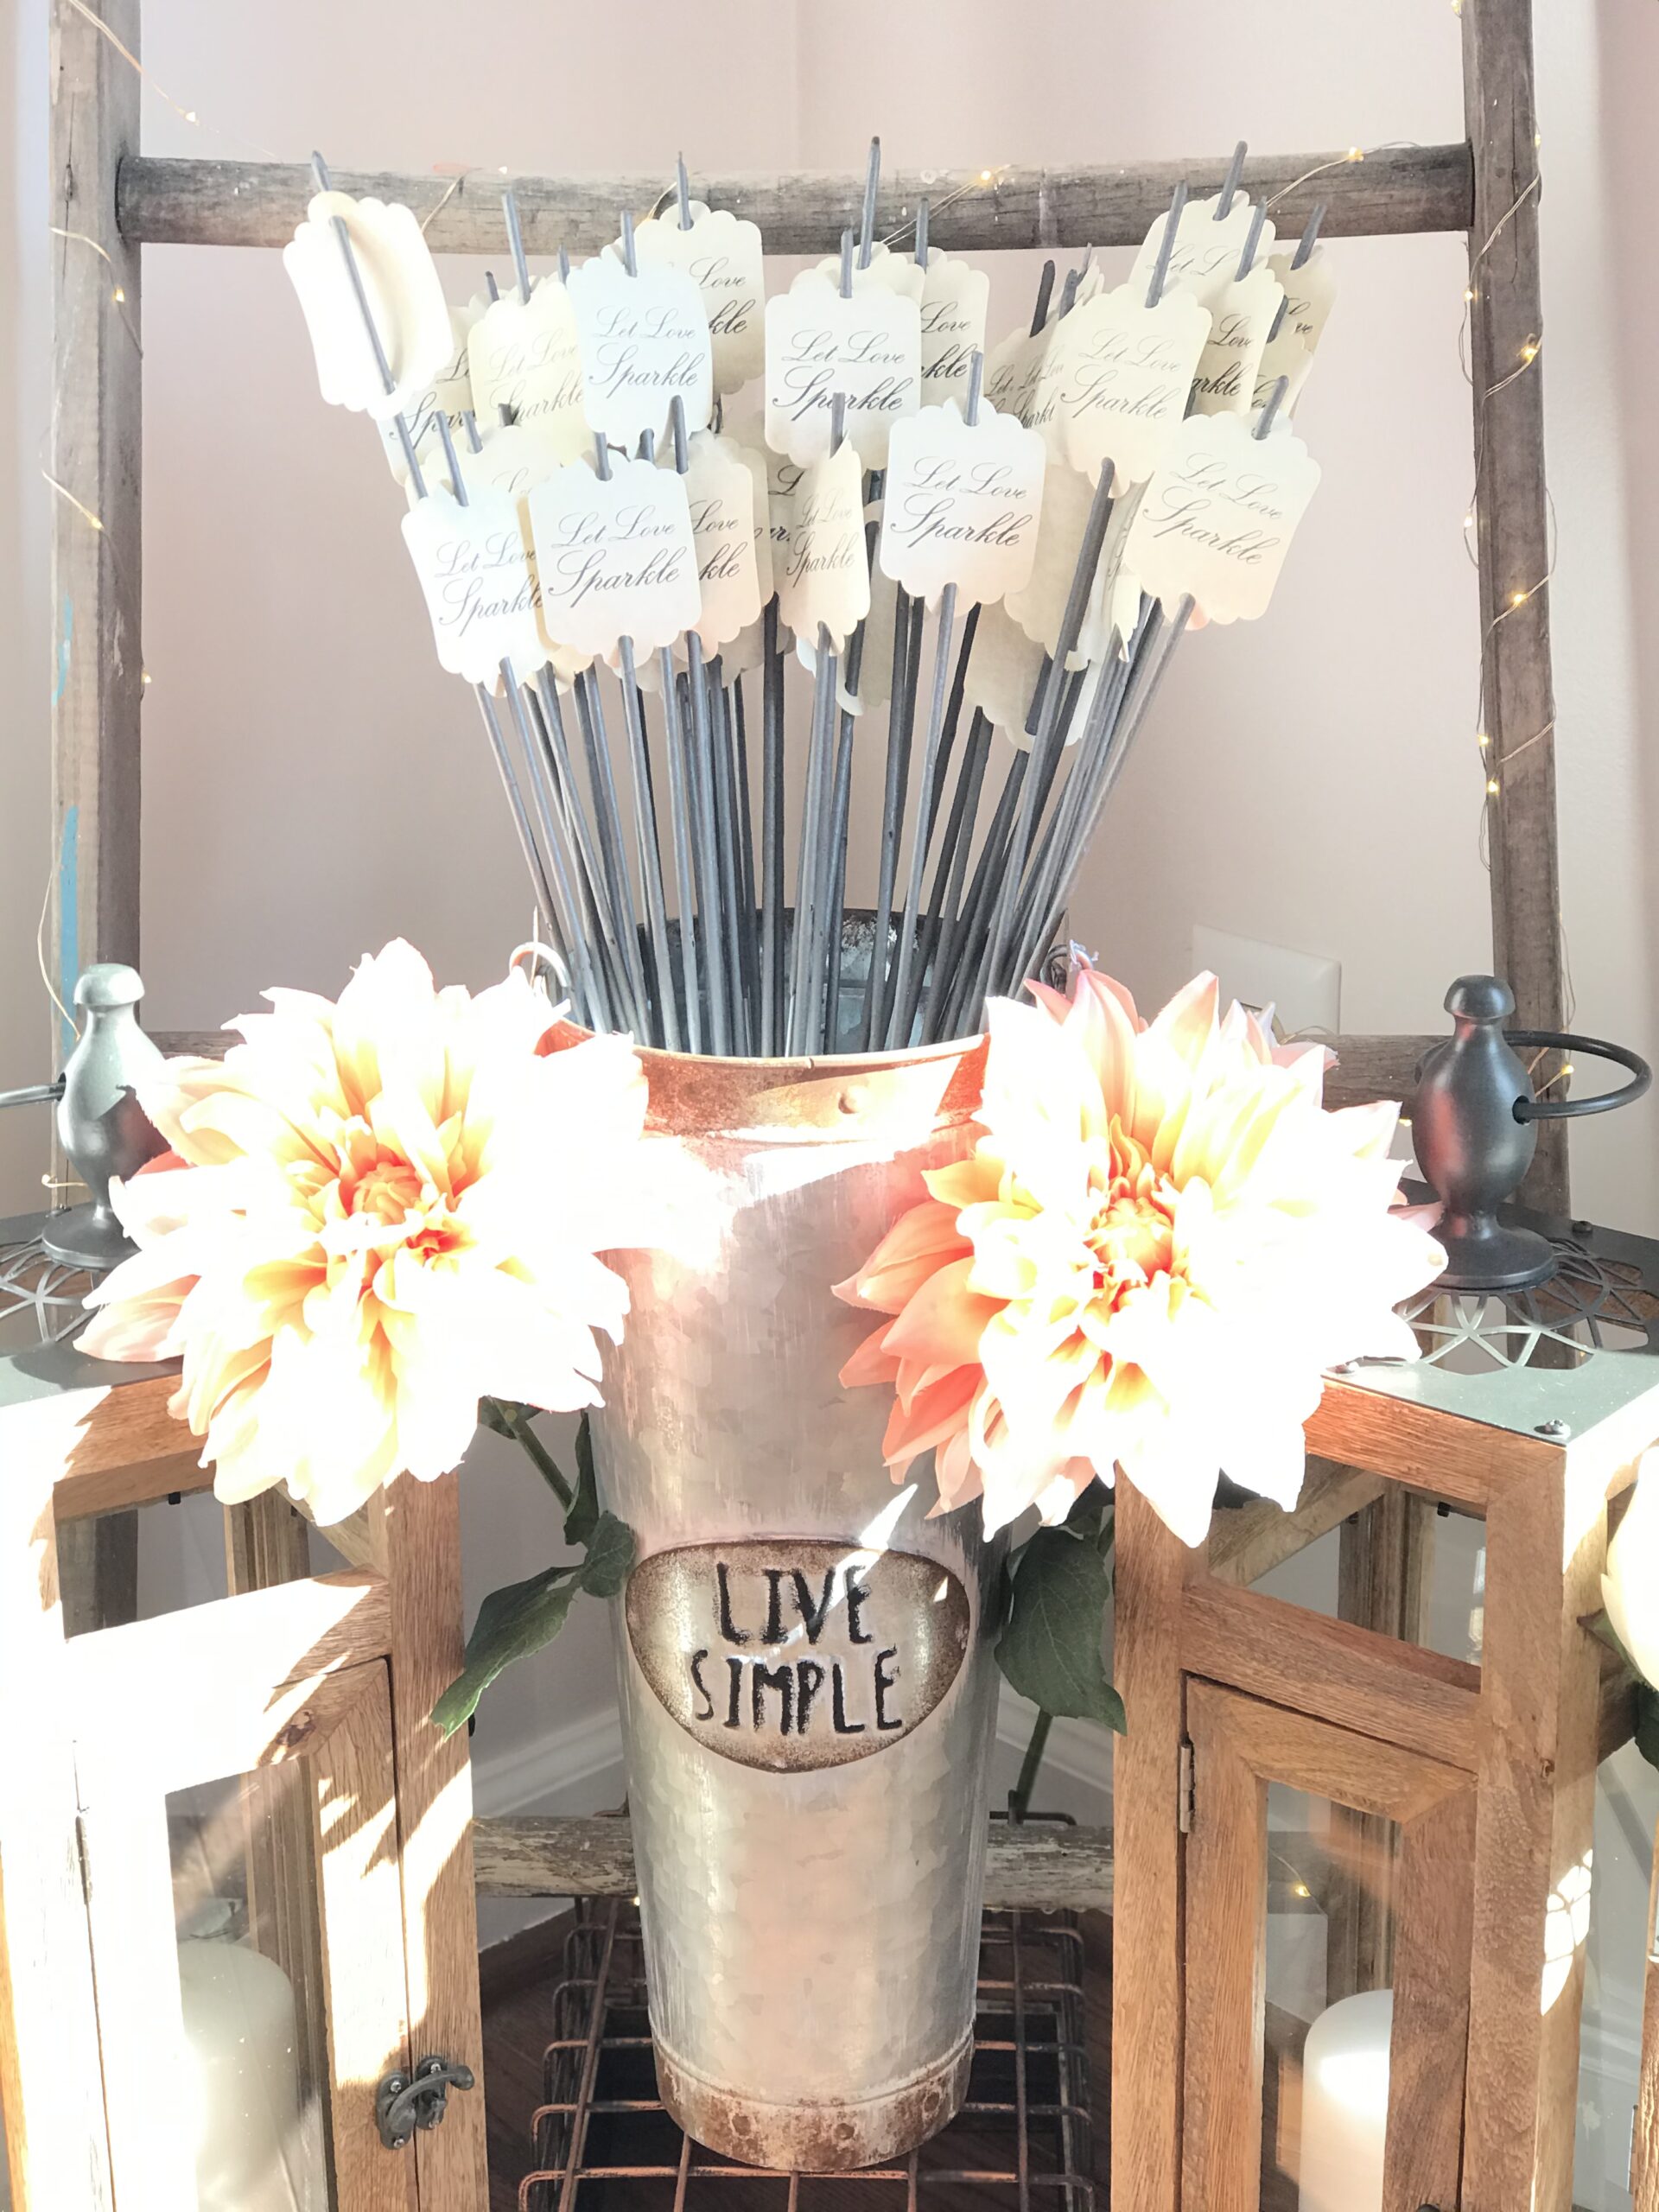 A vase with flowers and some sticks on top of it